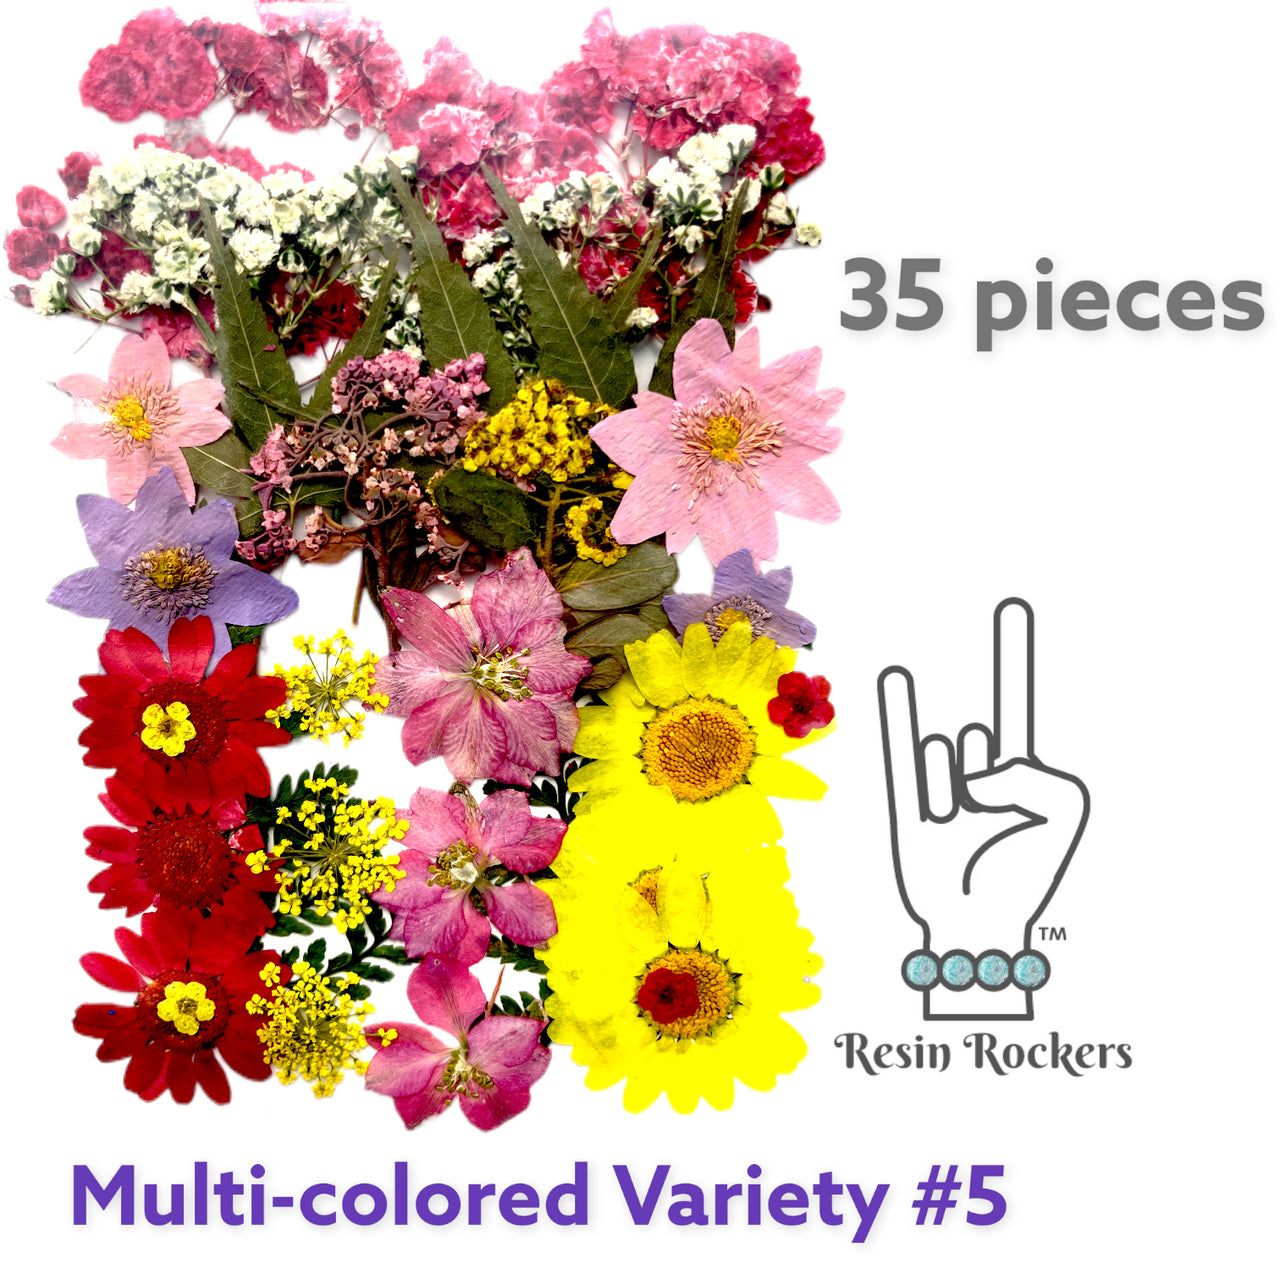 35 Piece Multi-colored Variety #5 Dried Pressed Real Natural Flowers For Epoxy & UV Resin Art